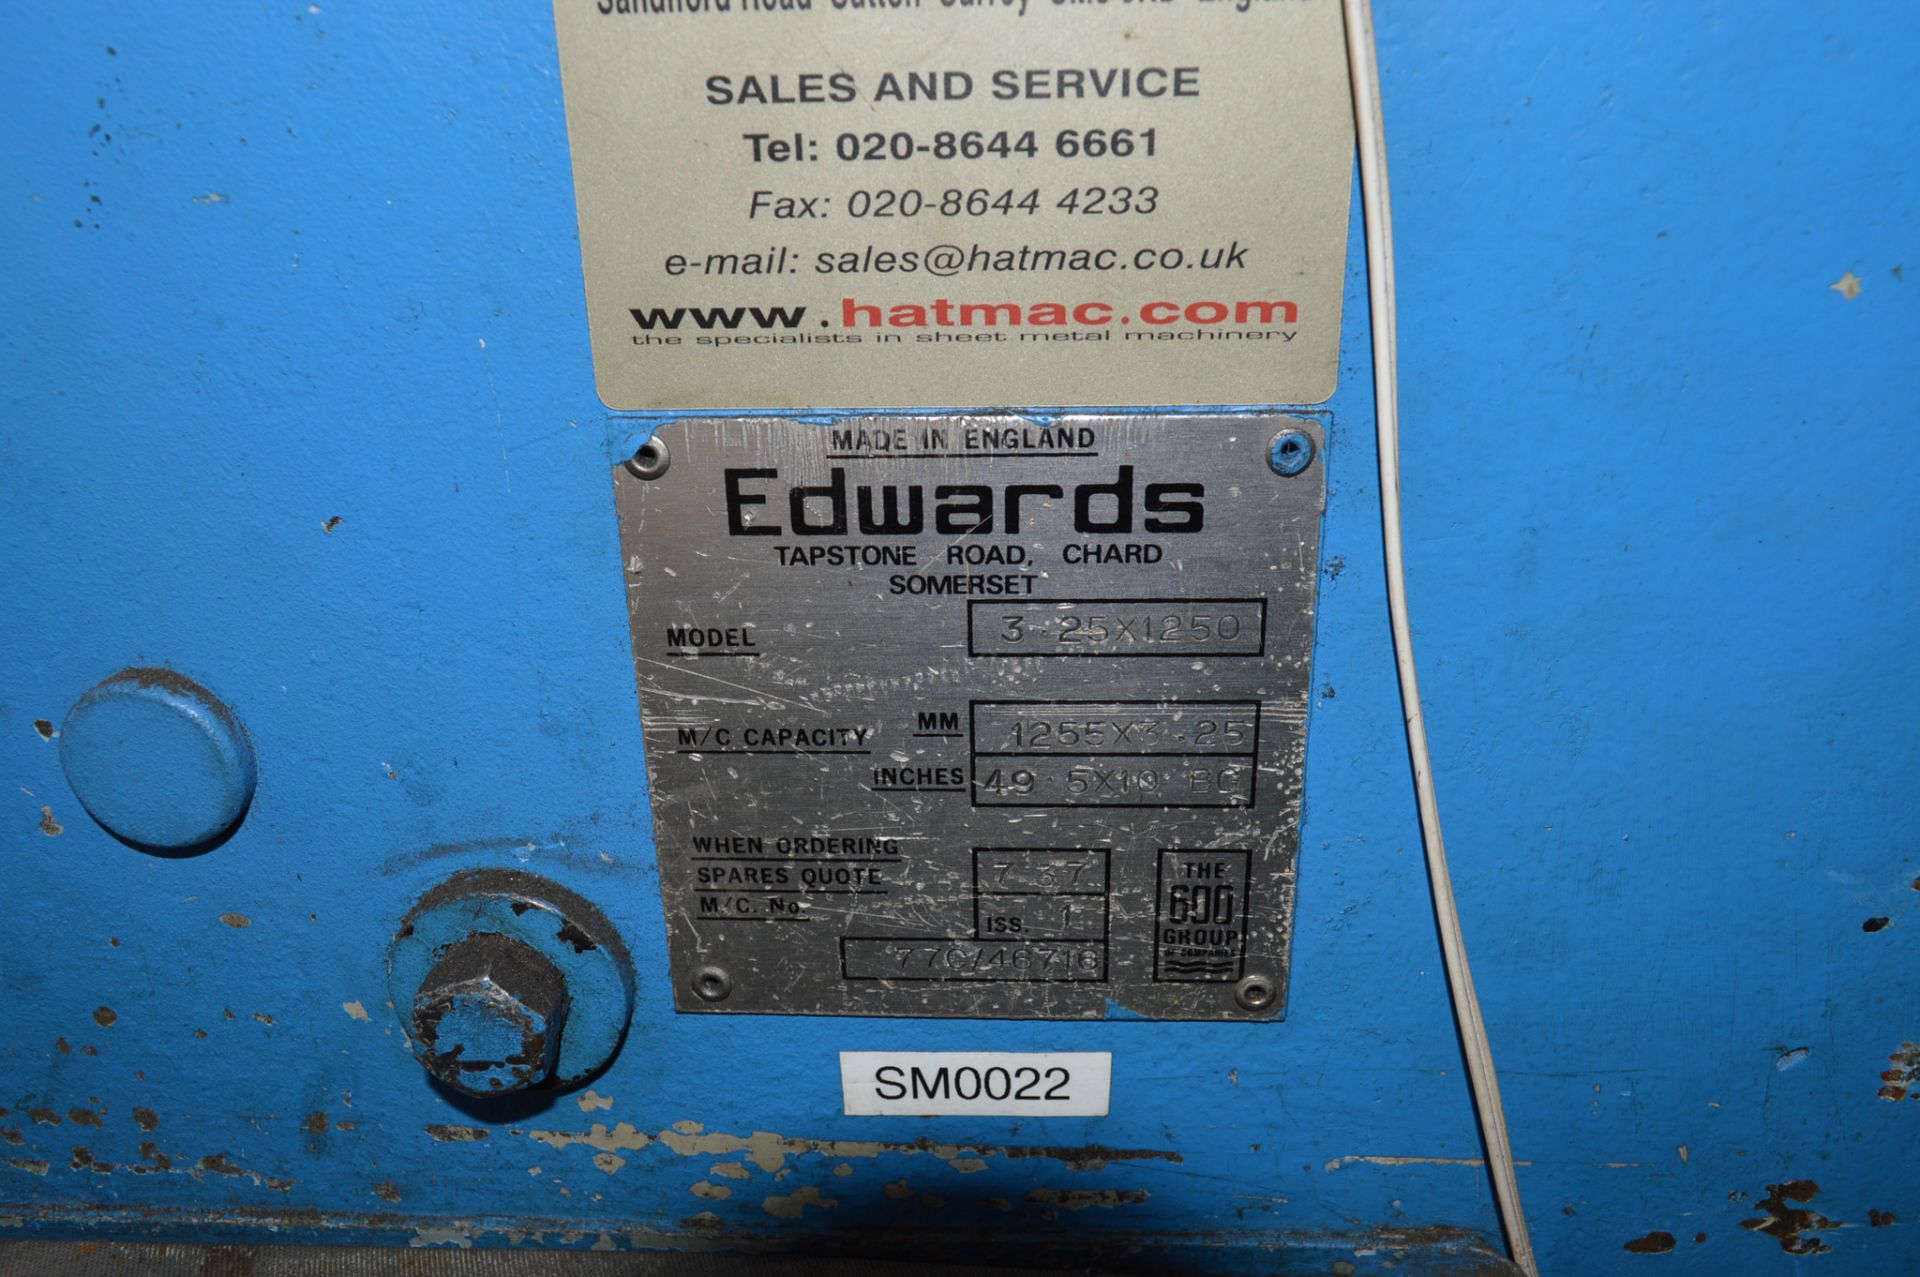 Edwards 3.25 x 1250 guillotine Capacity: 1255 x 3.25mm M/C no: 77C/46716 c/w backstop - Image 4 of 5